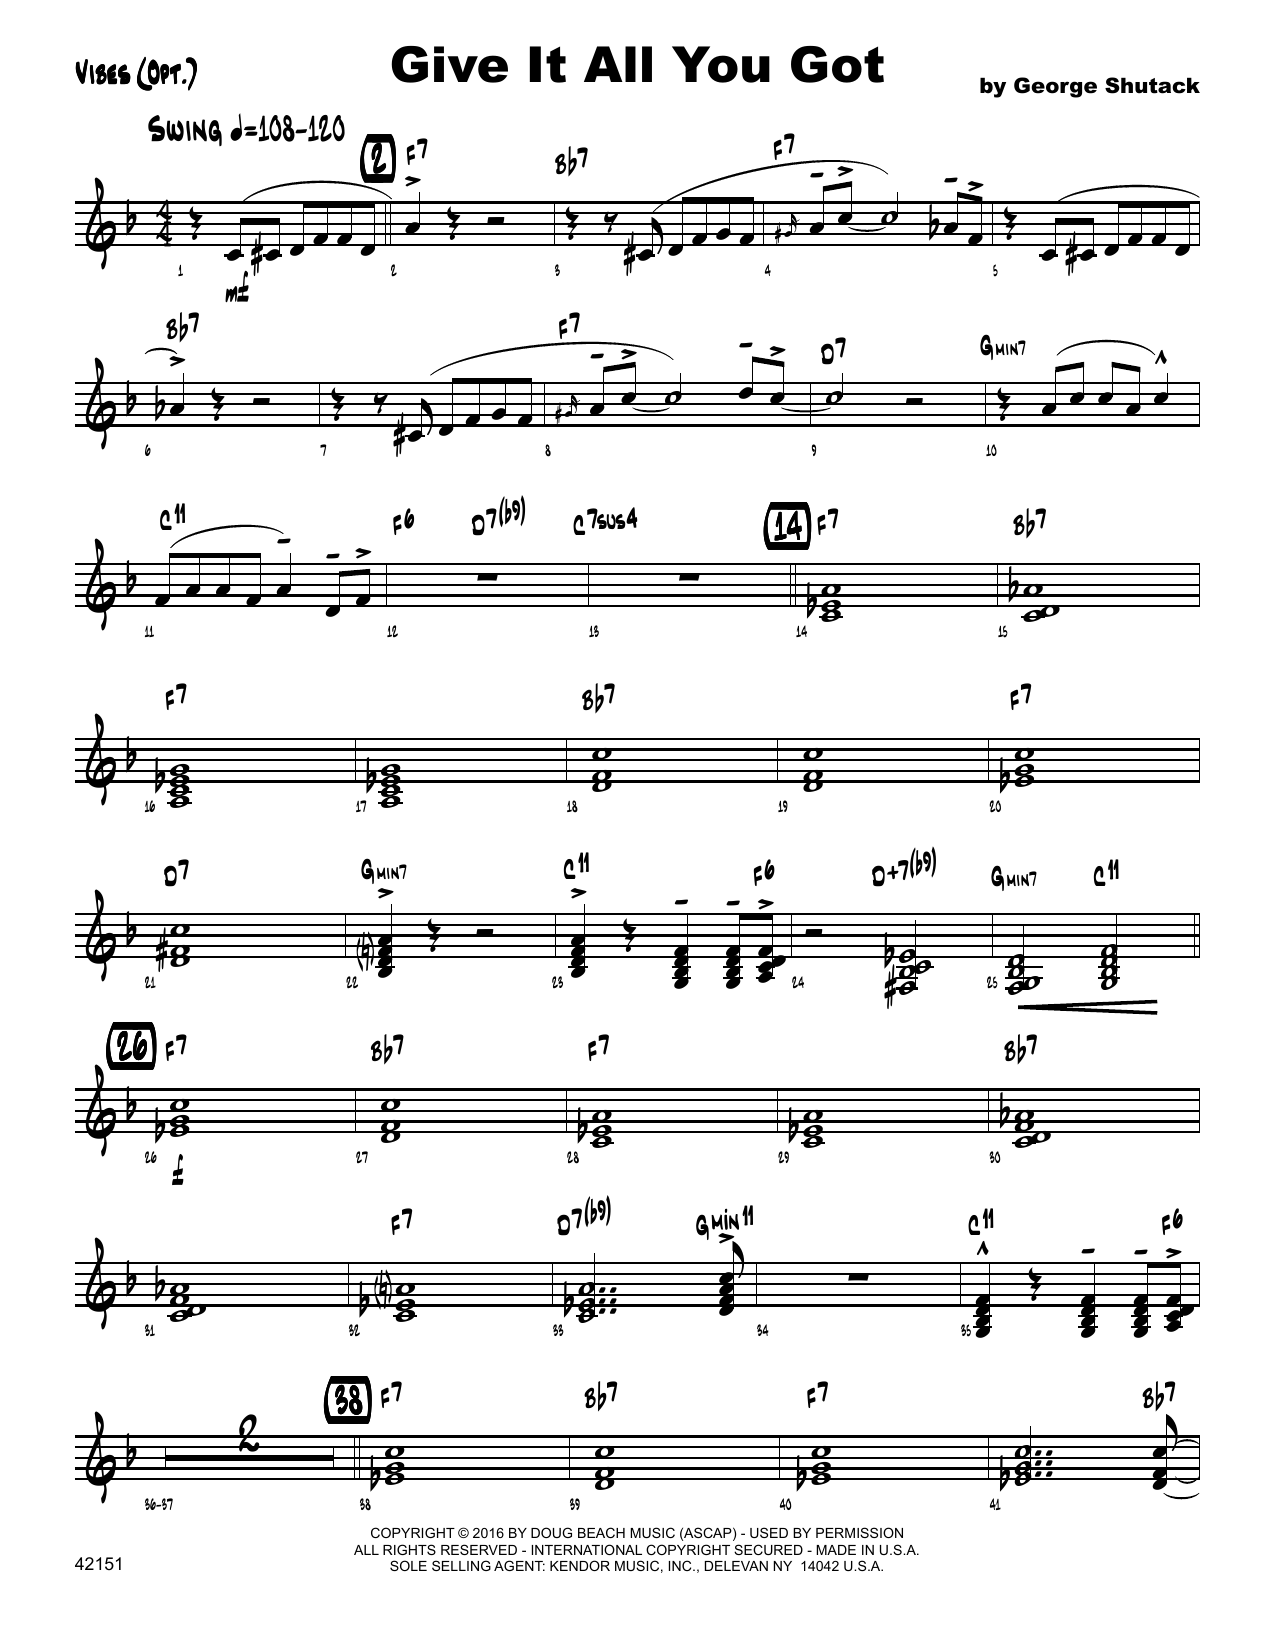 Download George Shutack Give It All You Got - Vibes Sheet Music